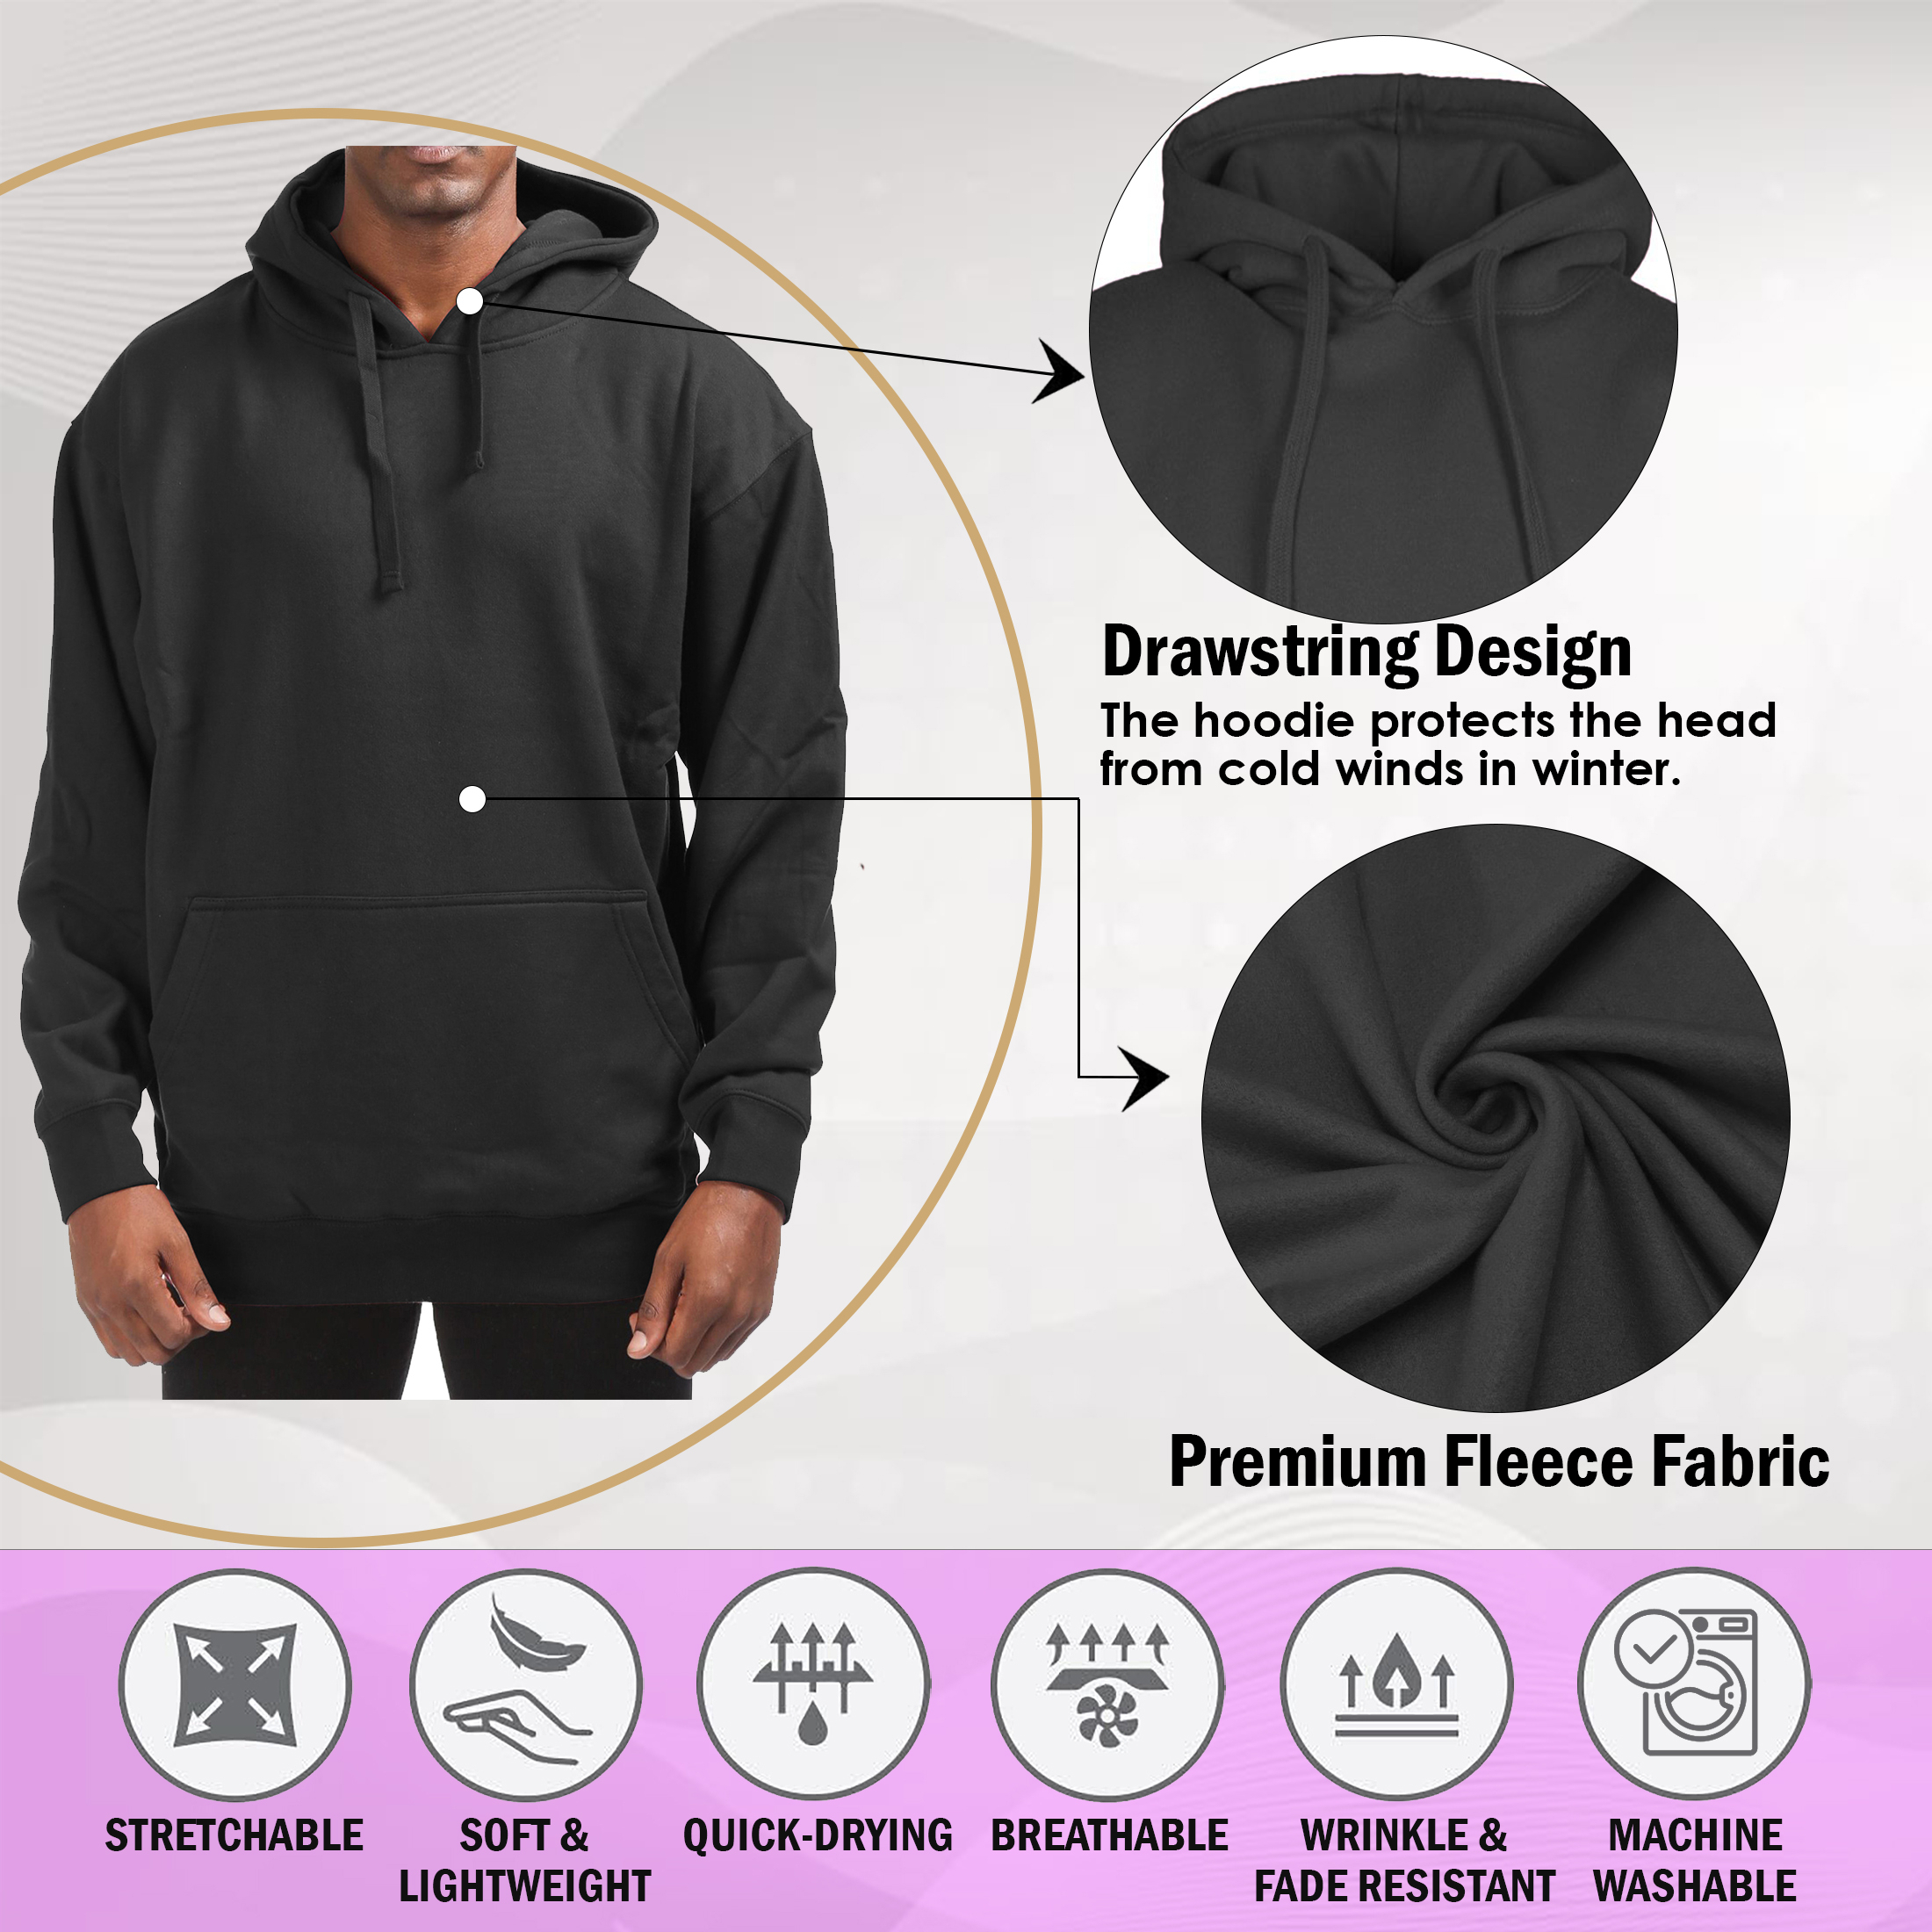 Men's Cotton-Blend Fleece Pullover Hoodie With Pocket (Big & Tall Sizes Available) - Black, Medium